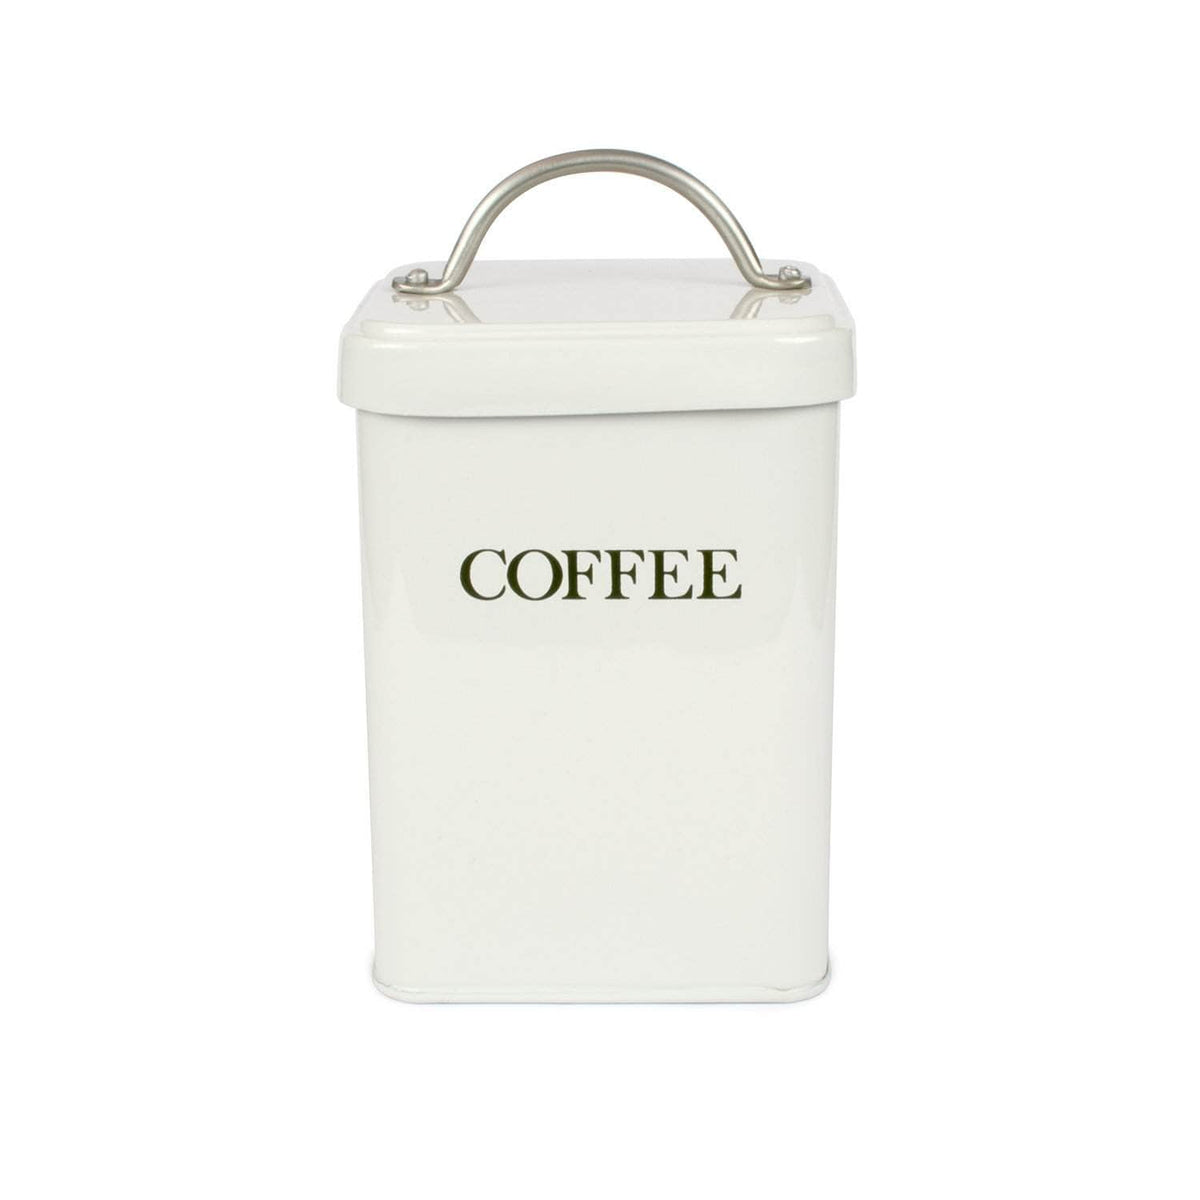 Steel coffee canister in chalk